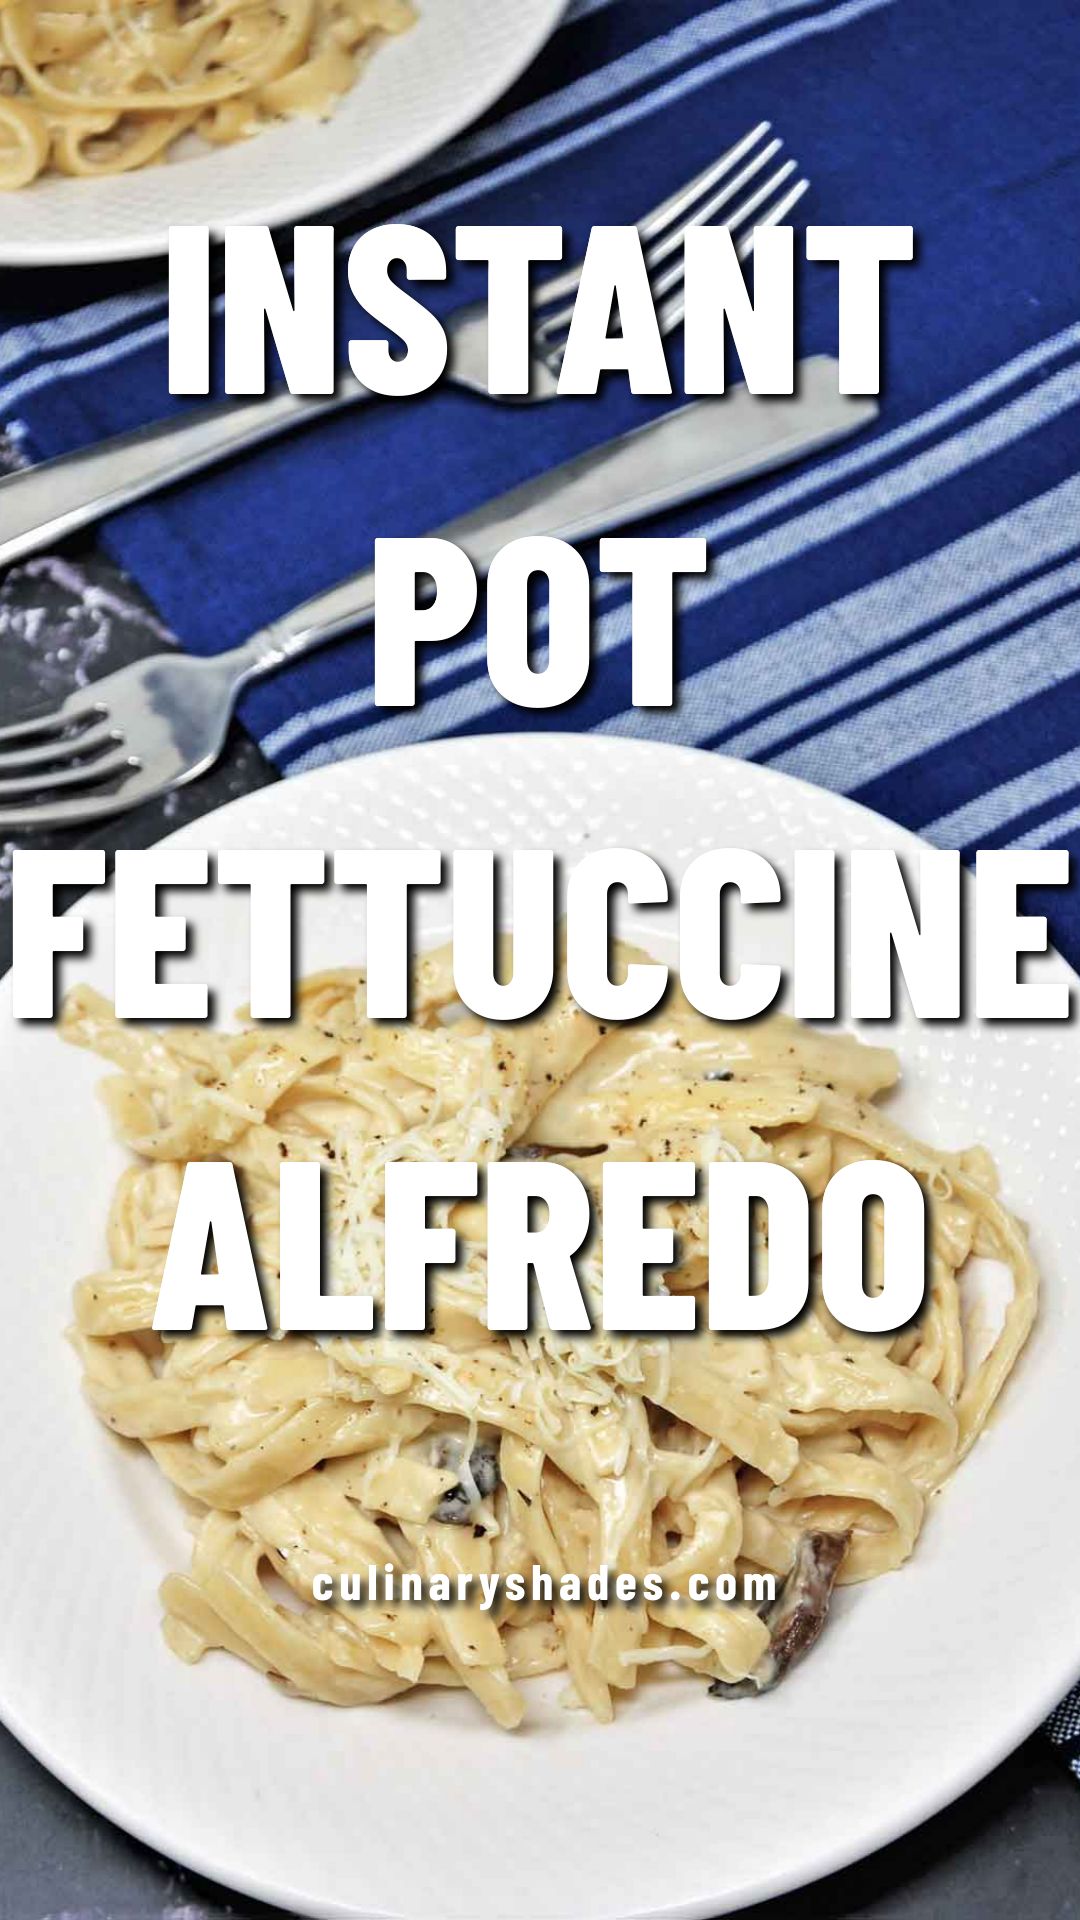 Fettuccine Alfredo served in a plate with shredded cheese topping.